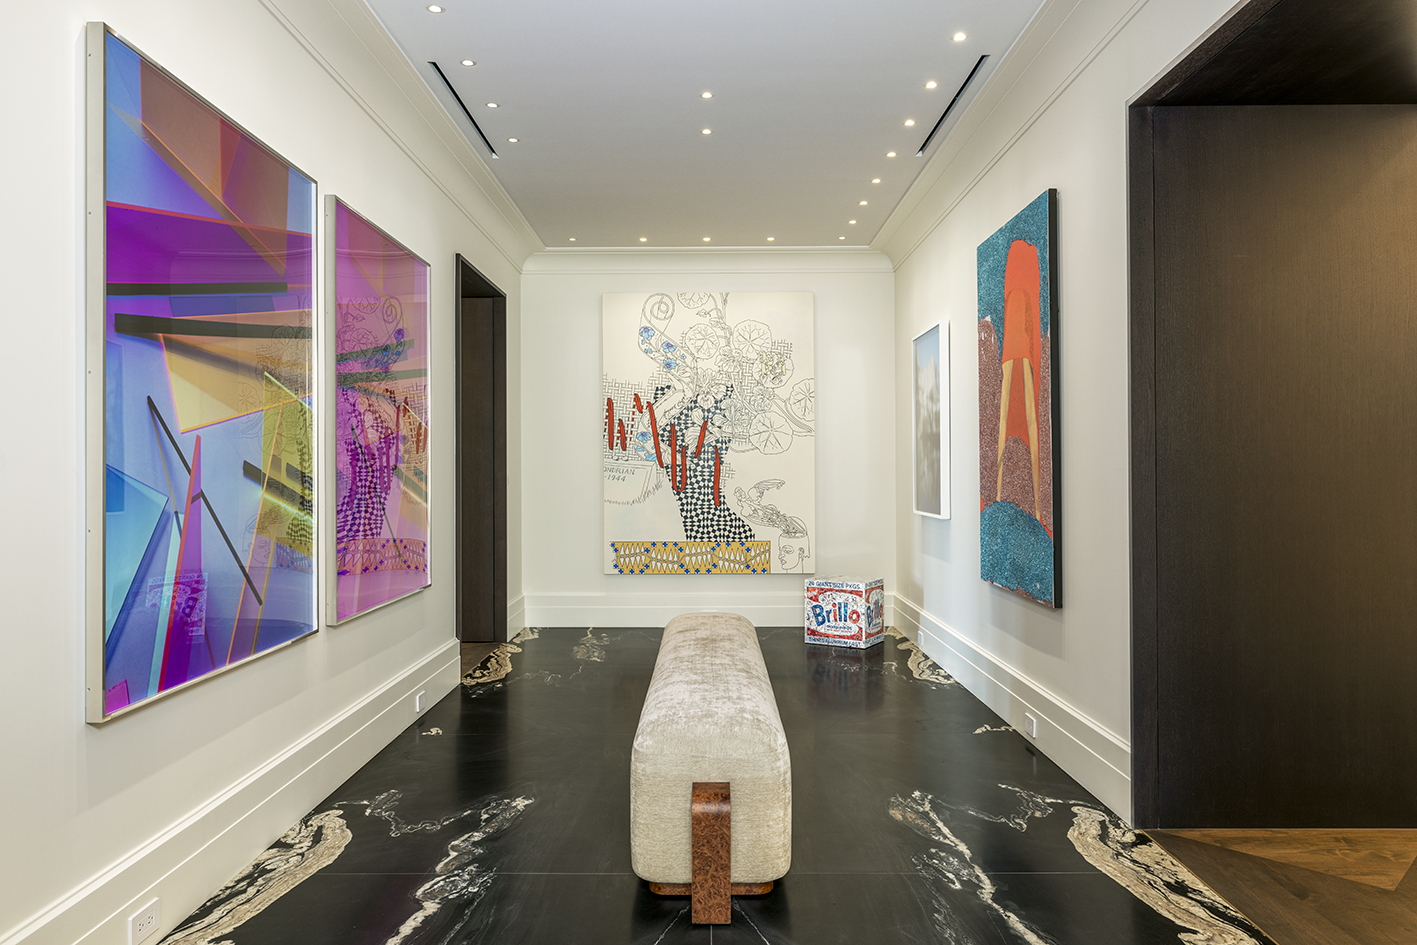 Gallery space with marble floor and contemporary art collection on white walls